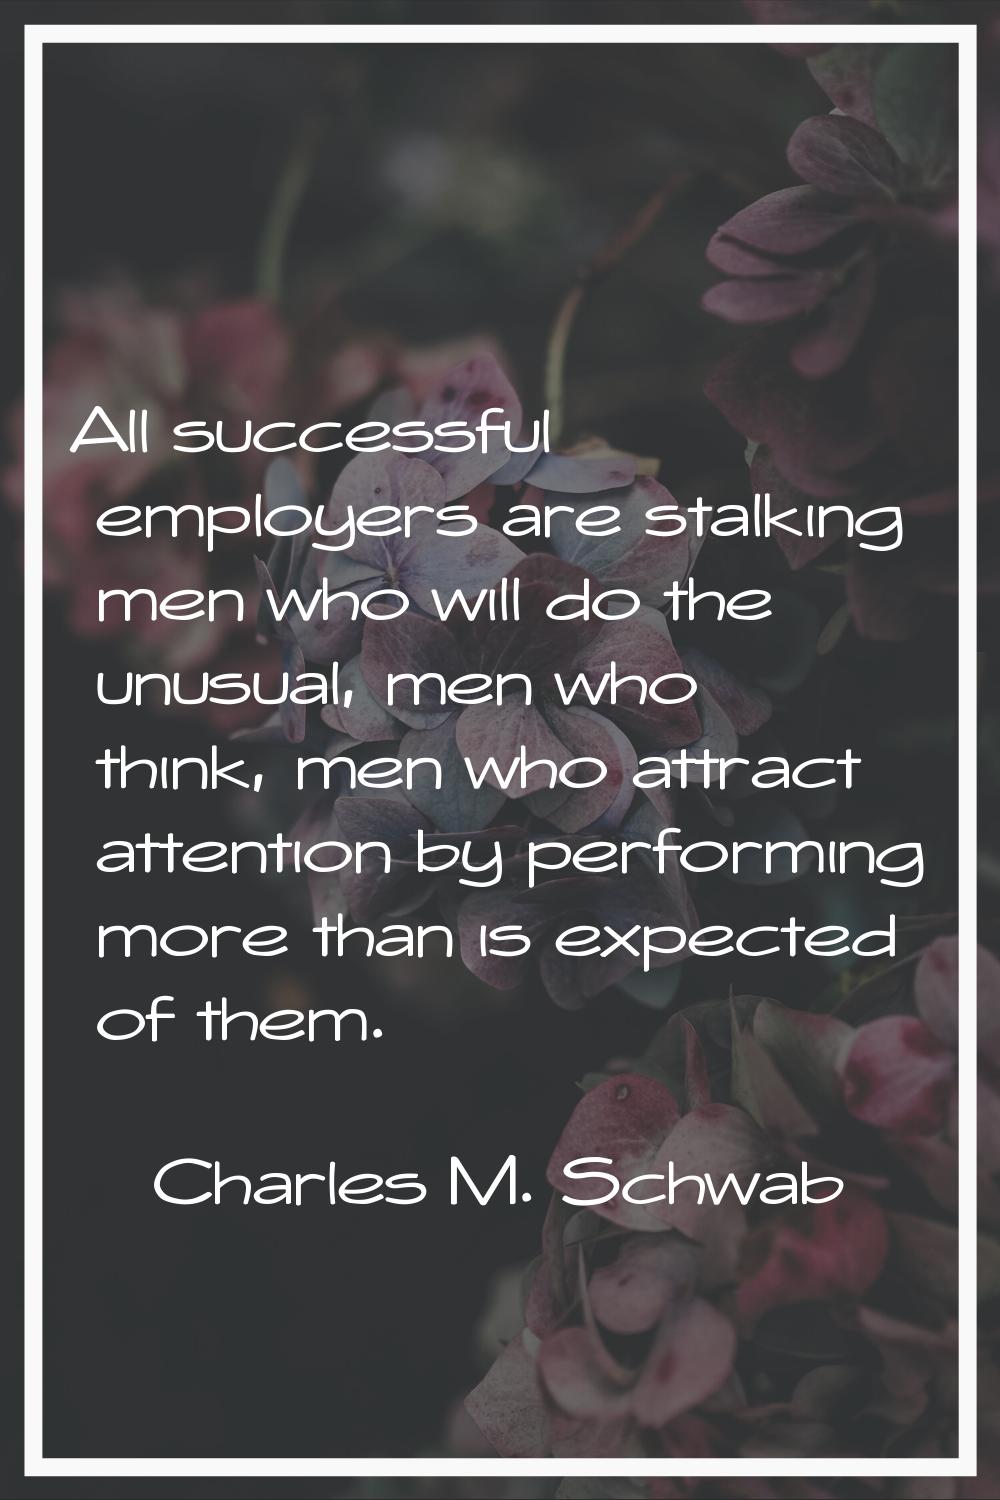 All successful employers are stalking men who will do the unusual, men who think, men who attract a